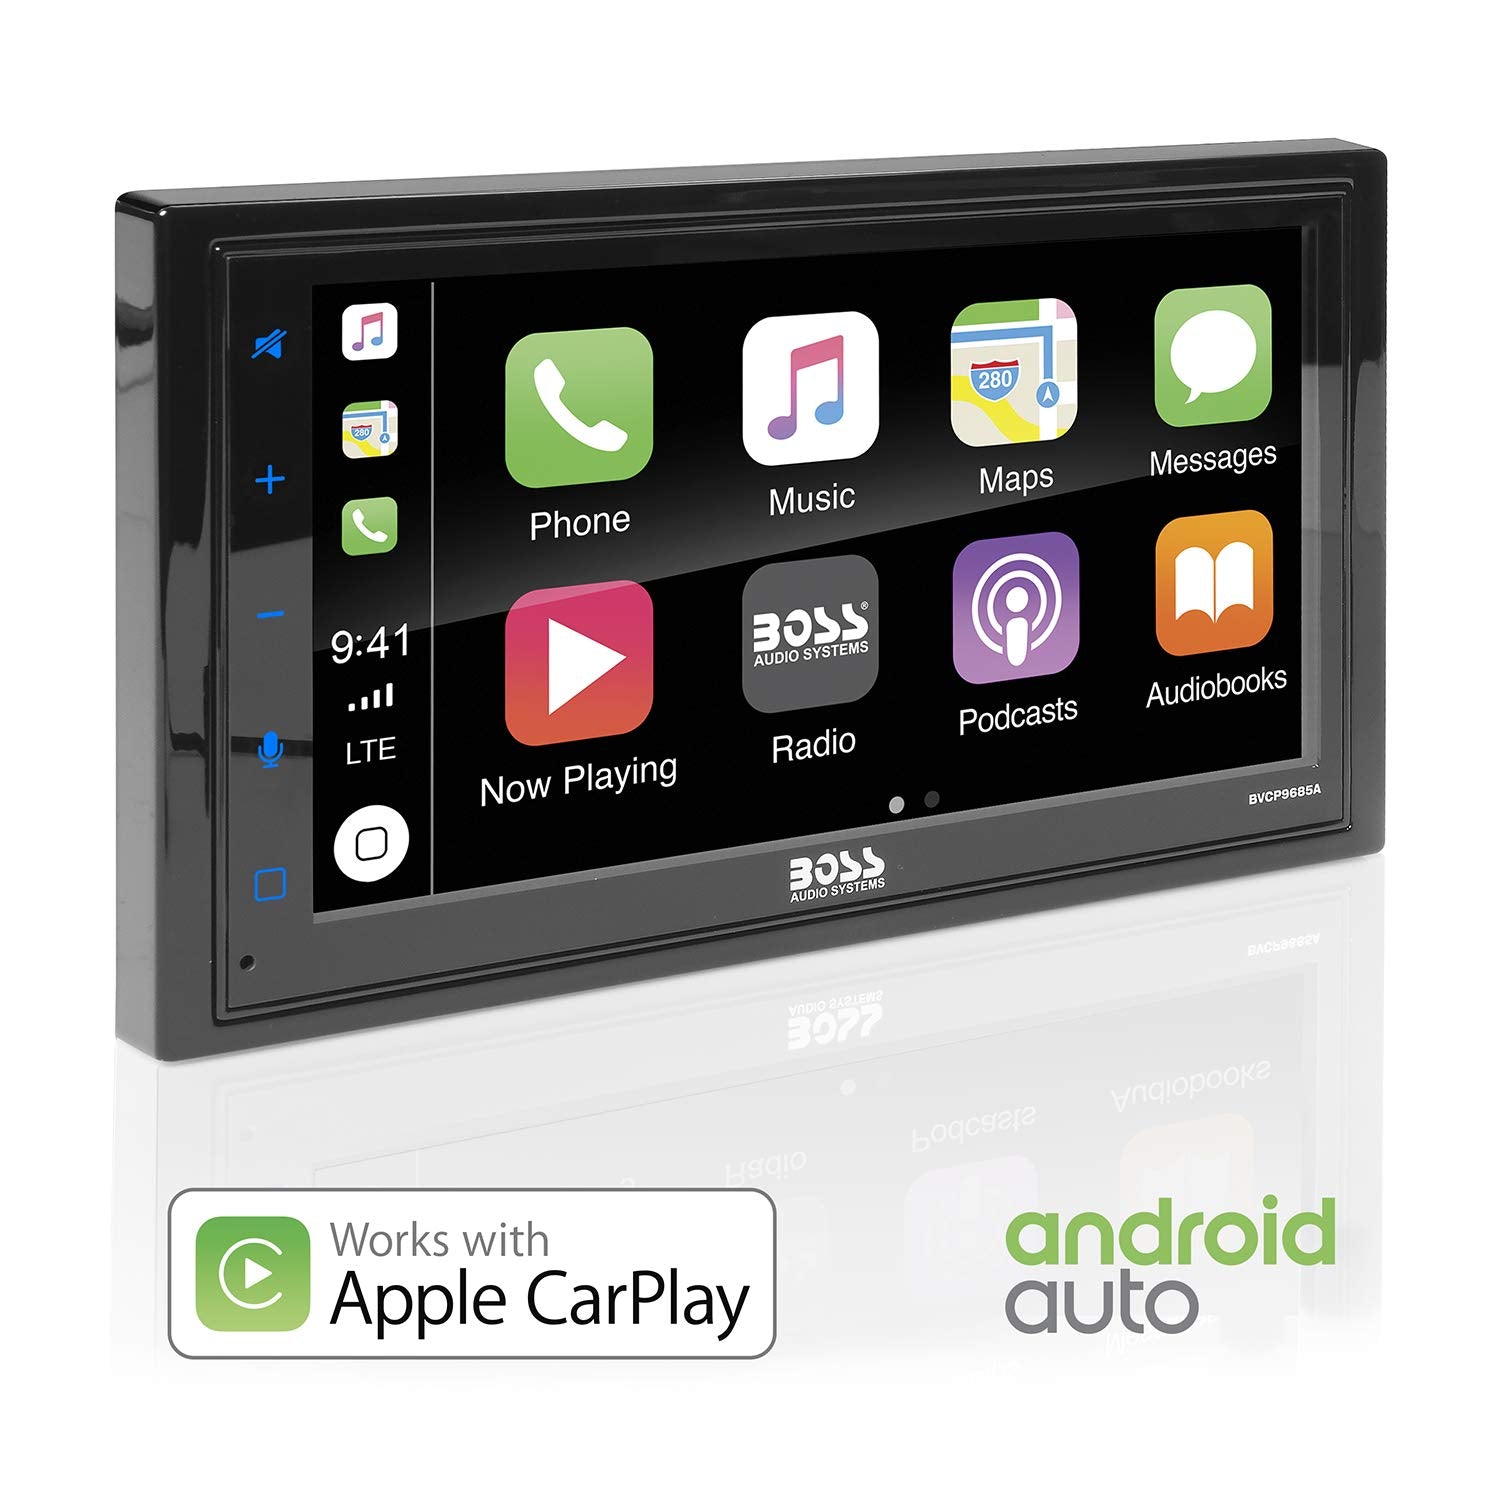 BOSS Audio BVCP9685A Apple Carplay Android Auto Car Multimedia Player